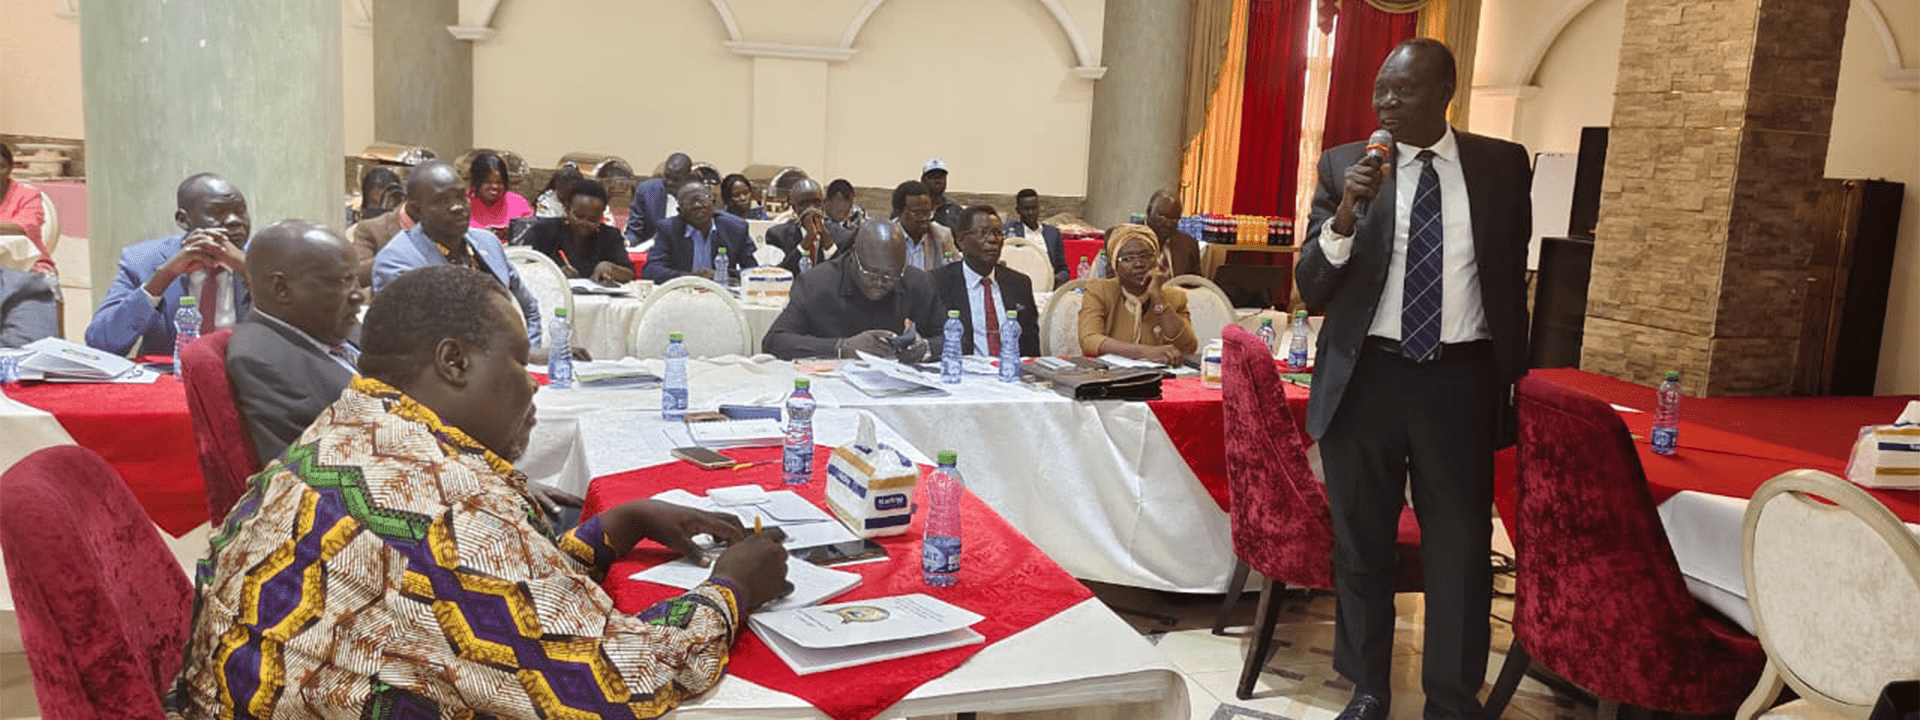 IGAD concludes a 2-Day orientation Workshop for South Sudan Parliamentary committees on the Draft National Land Policy